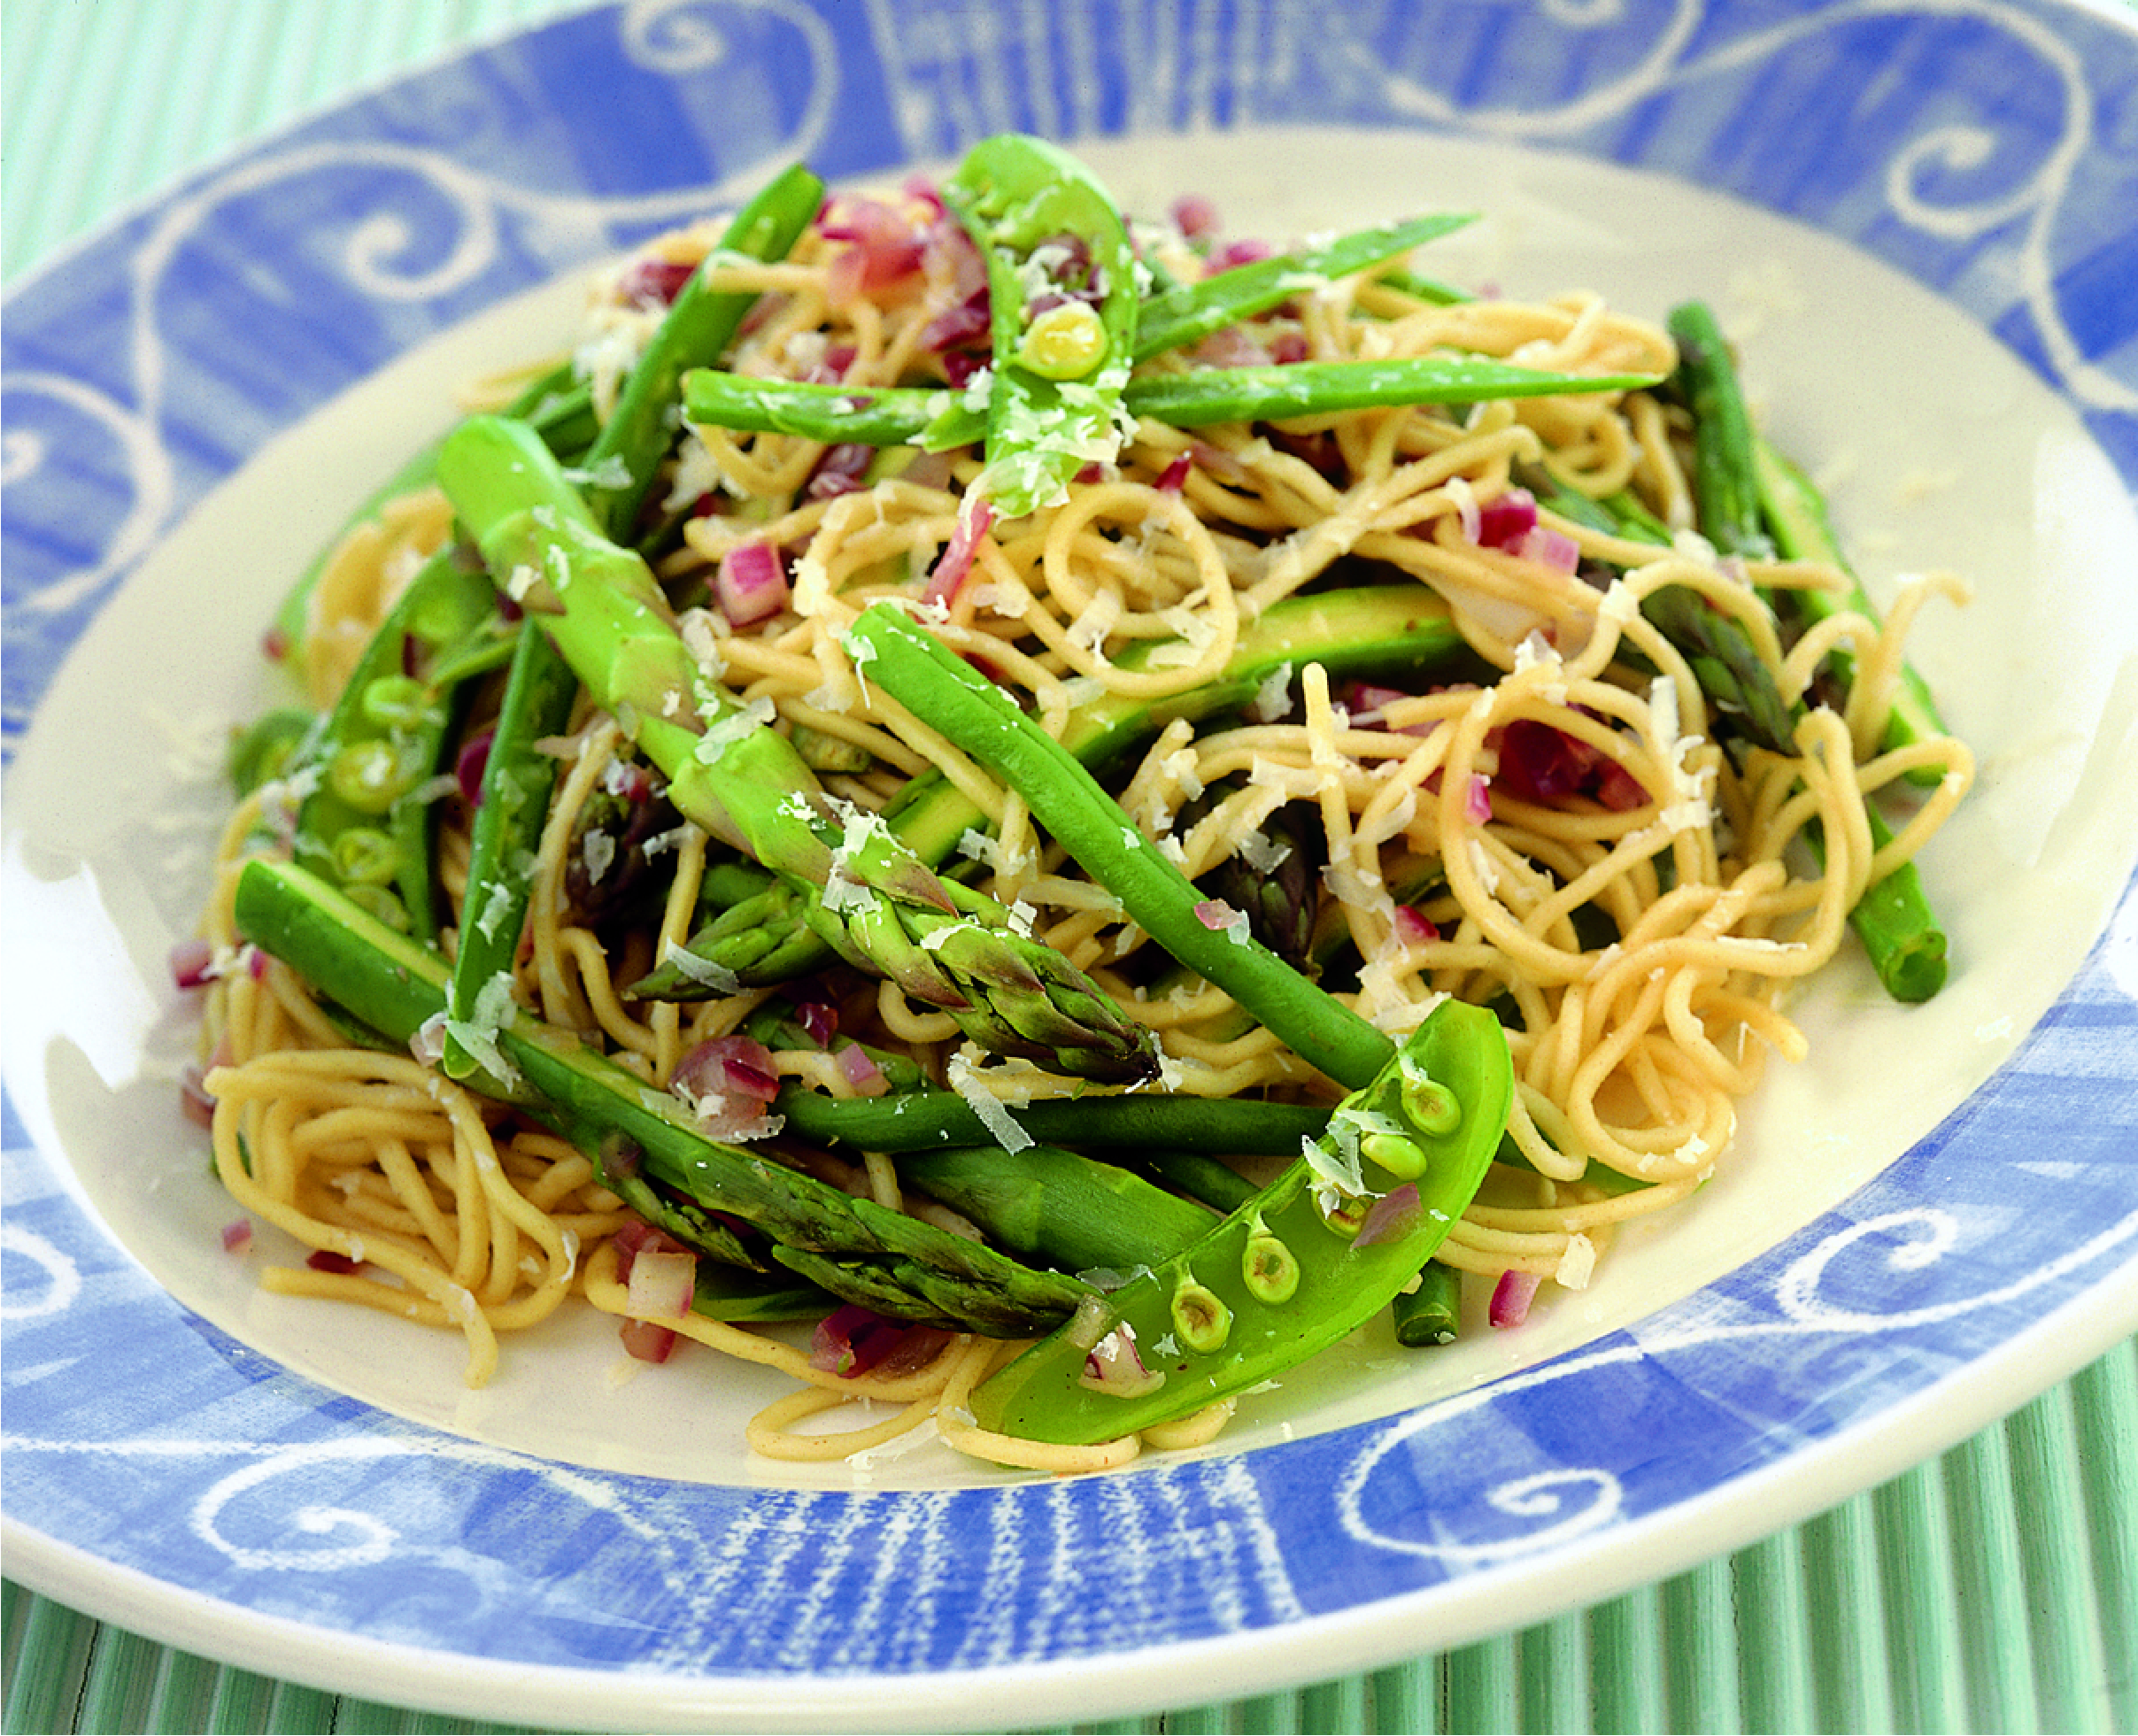 Plate of noodles mixed with green beans, asparagus and pea-pods